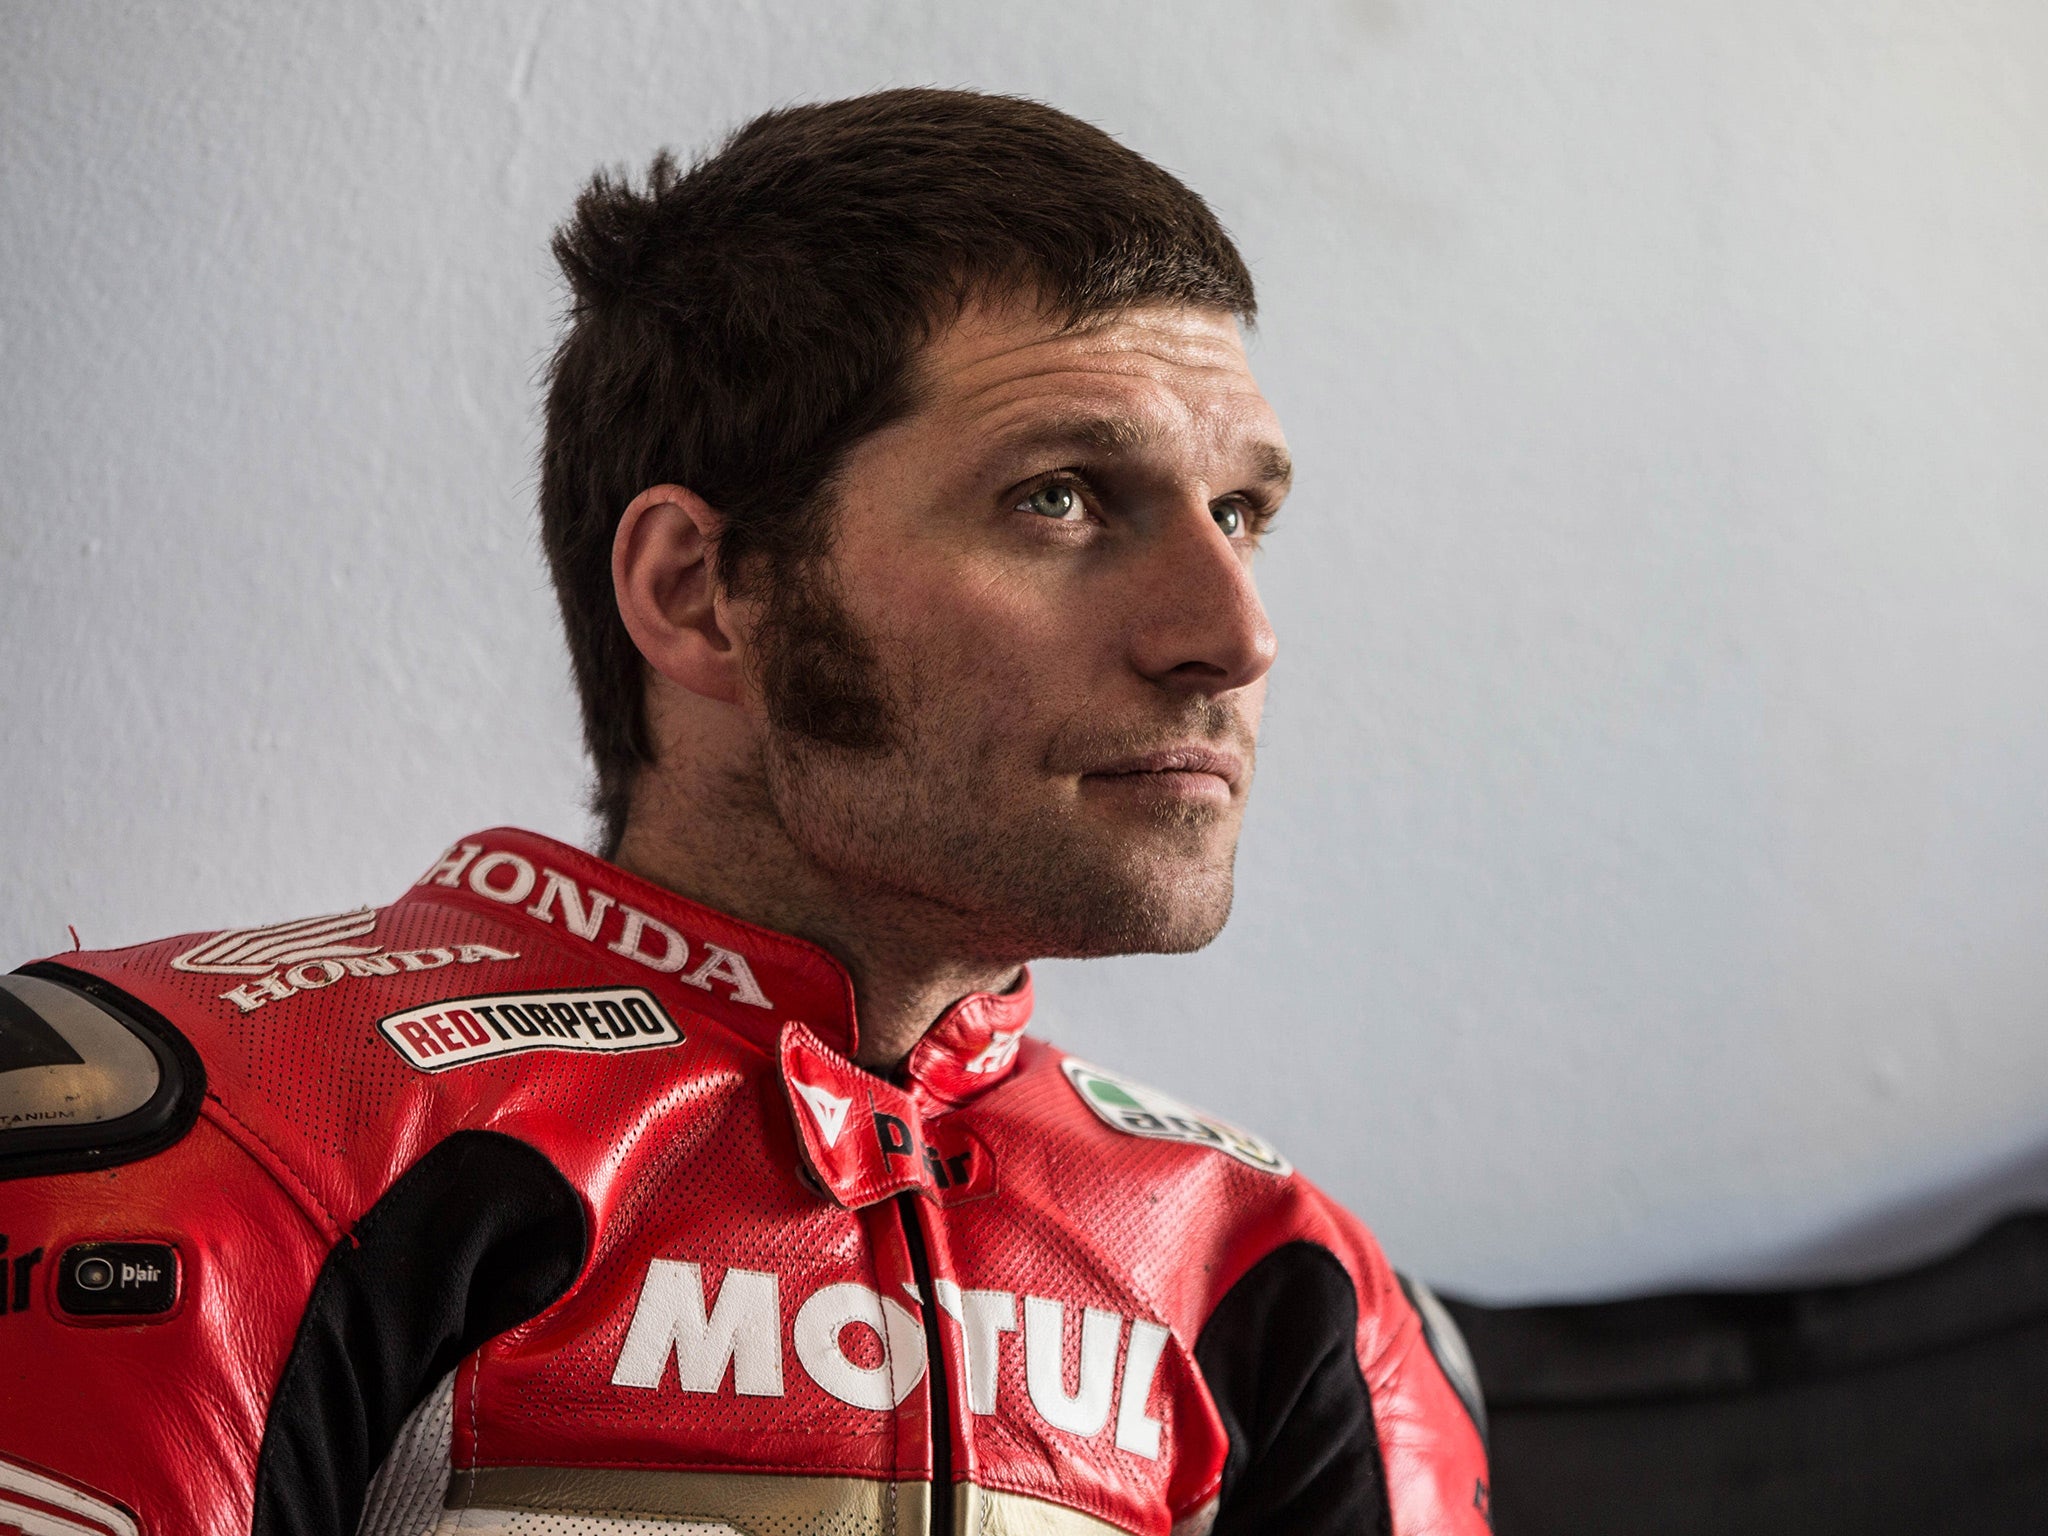 Guy Martin hopes to mark his return to road racing with his first Isle of Man TT victory